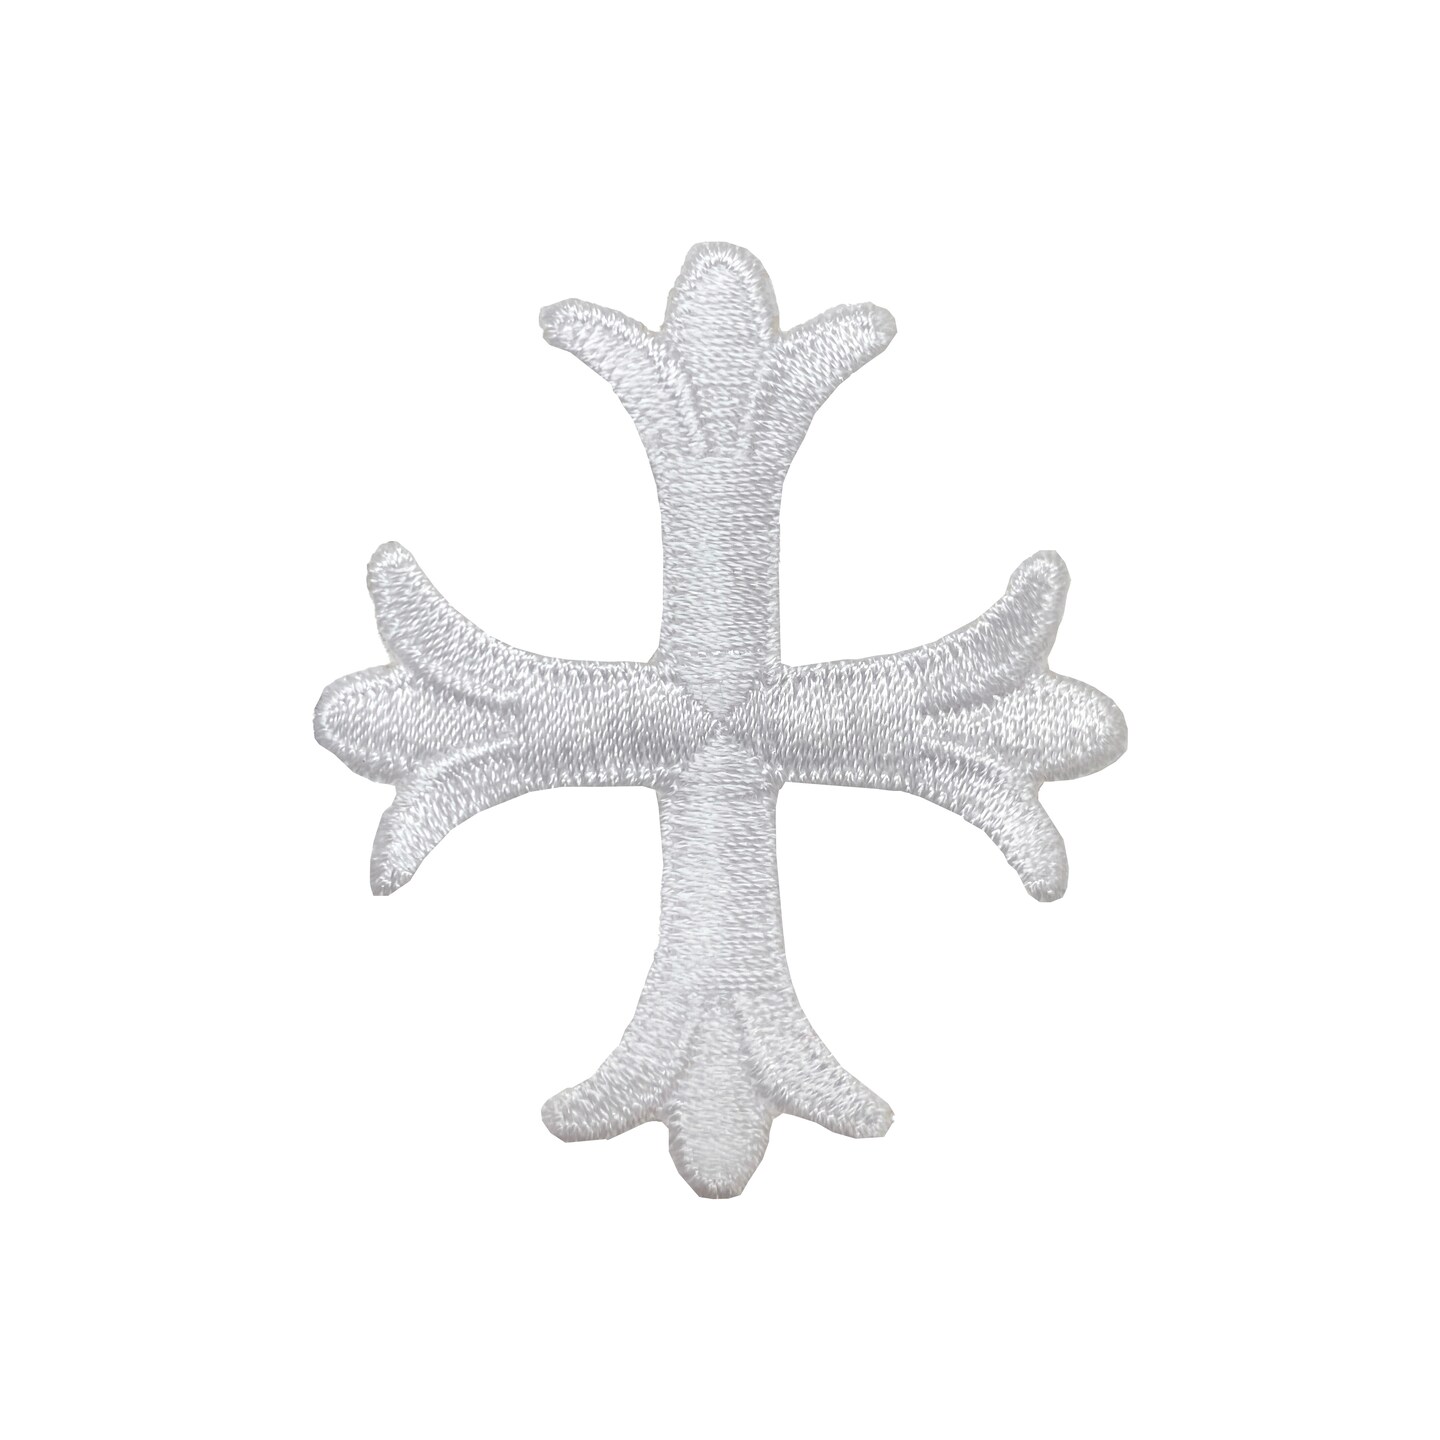 White Patonce Cross, Christian, Religious, Liturgical, Embroidered, Iron on Patch